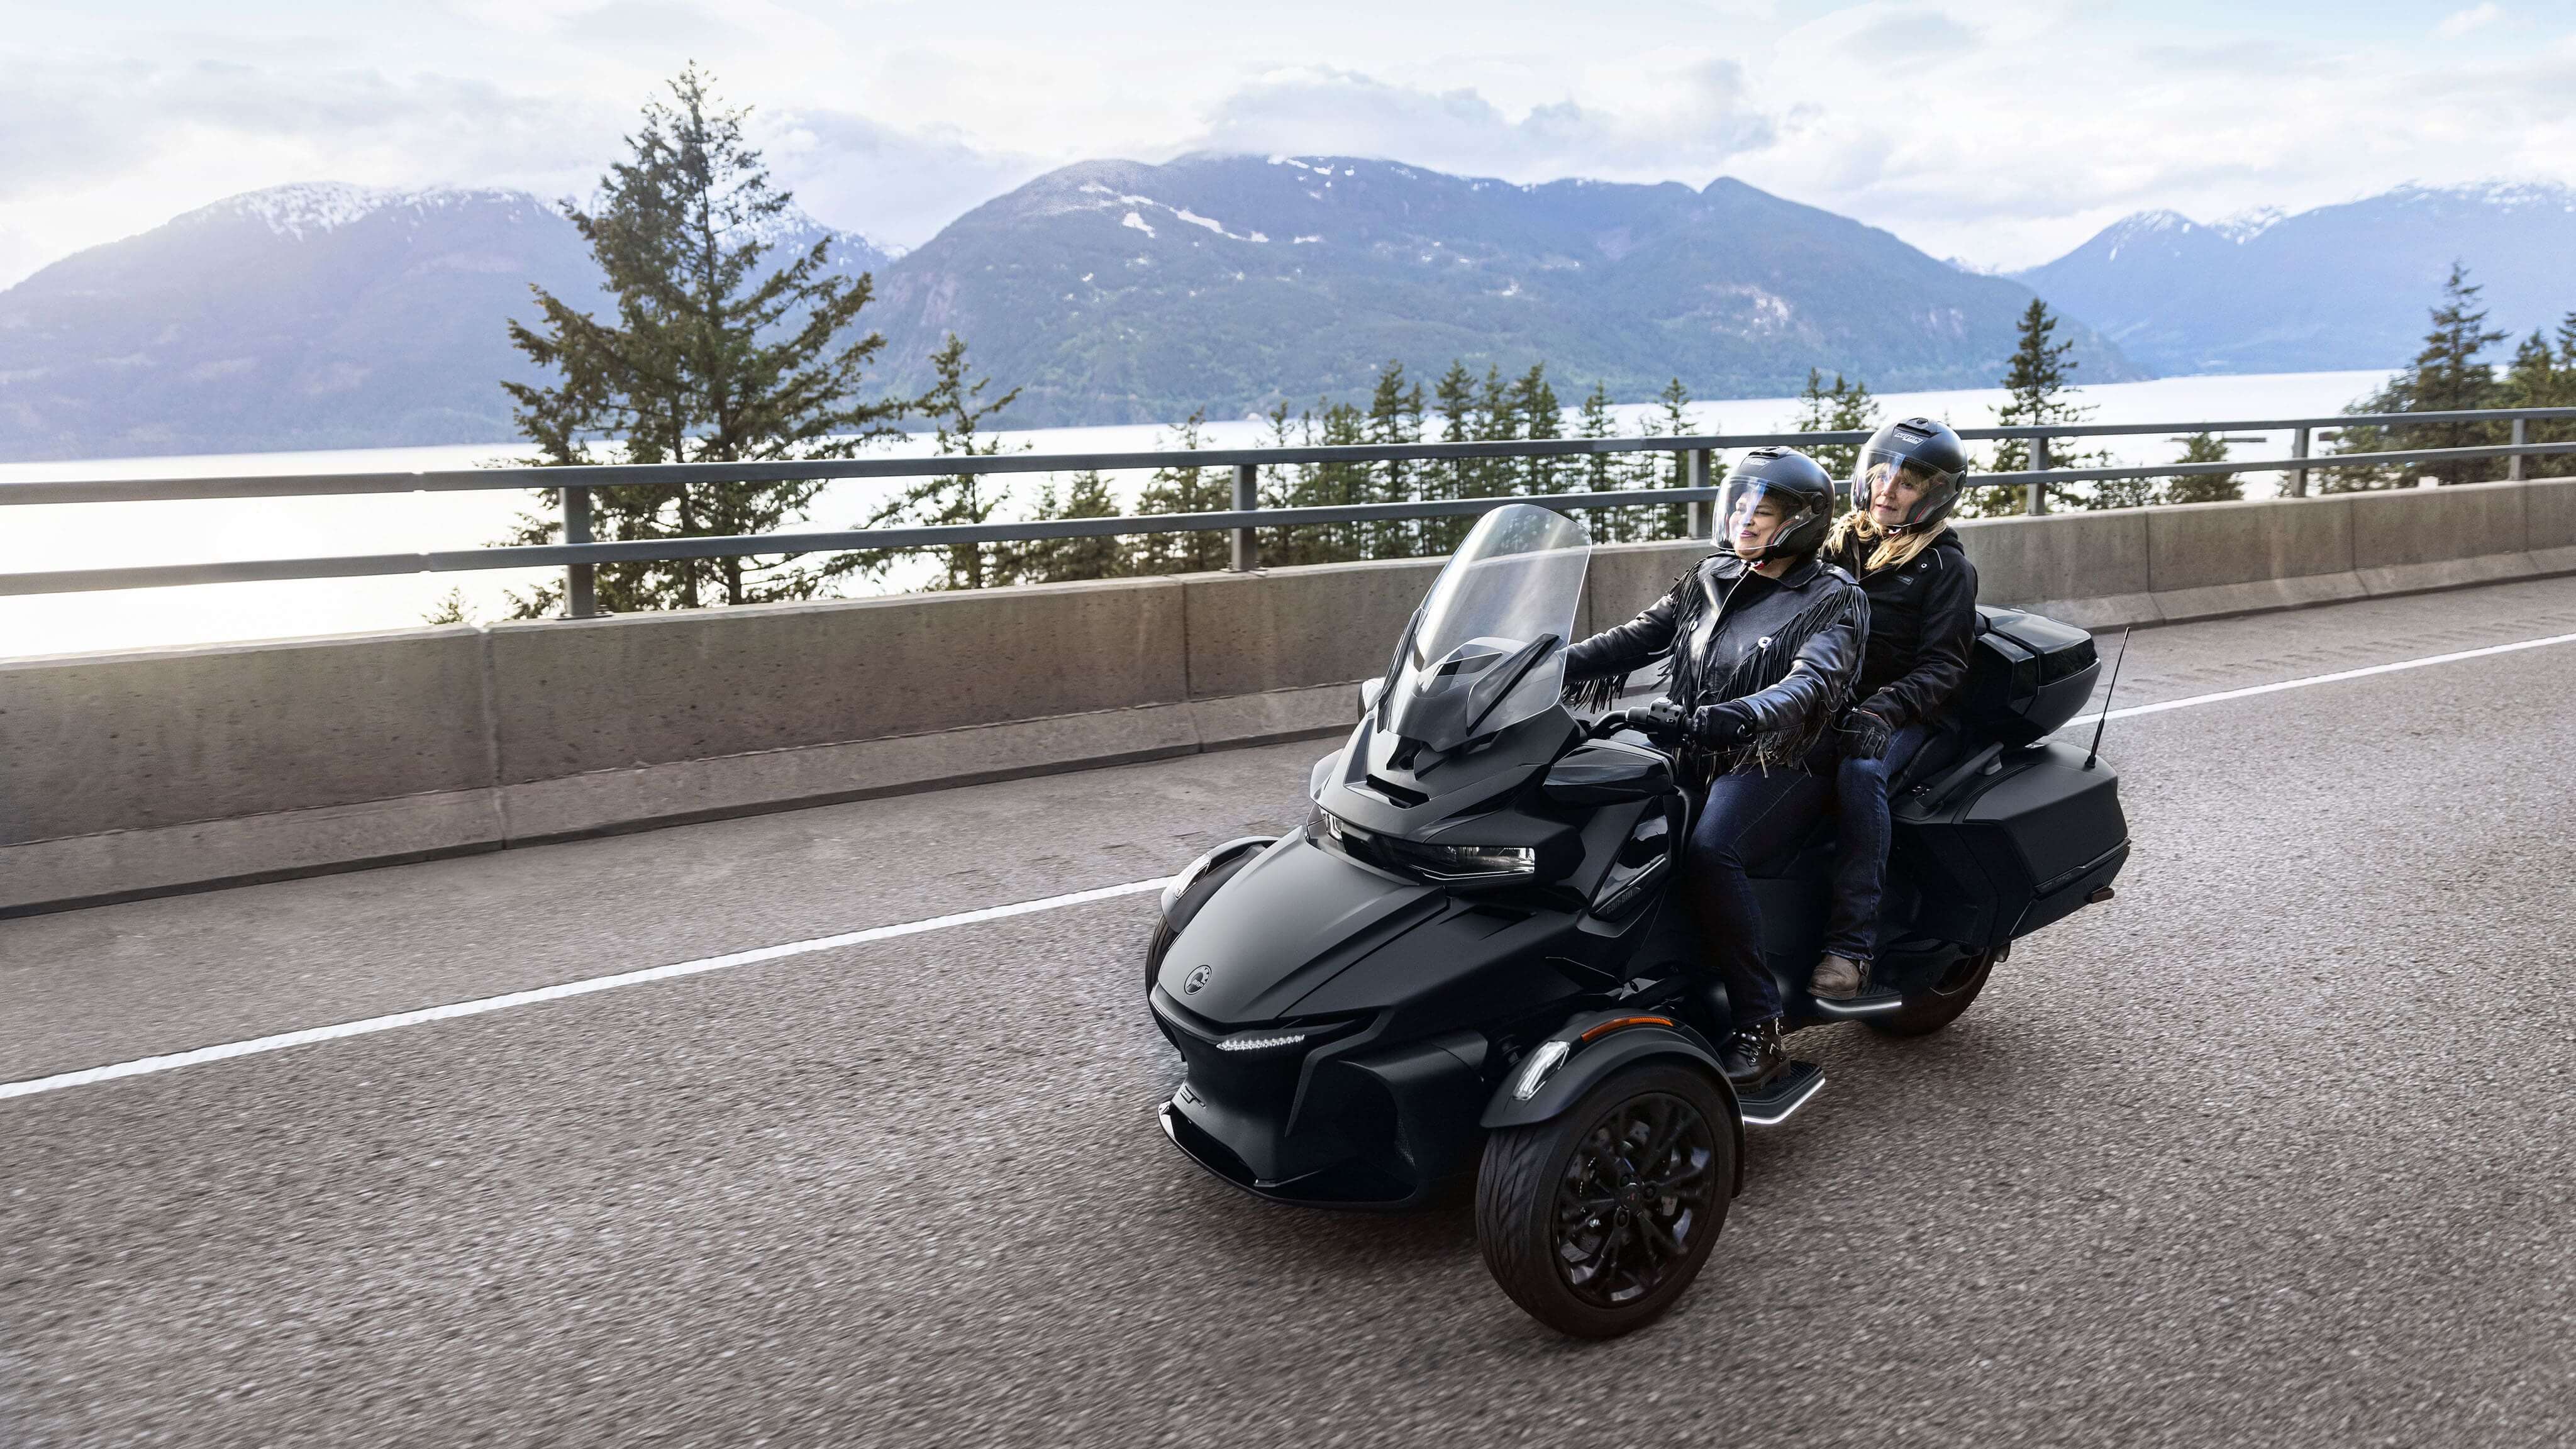 How to Choose the Best Can-Am 3-Wheel Vehicle Riding Gear for Women